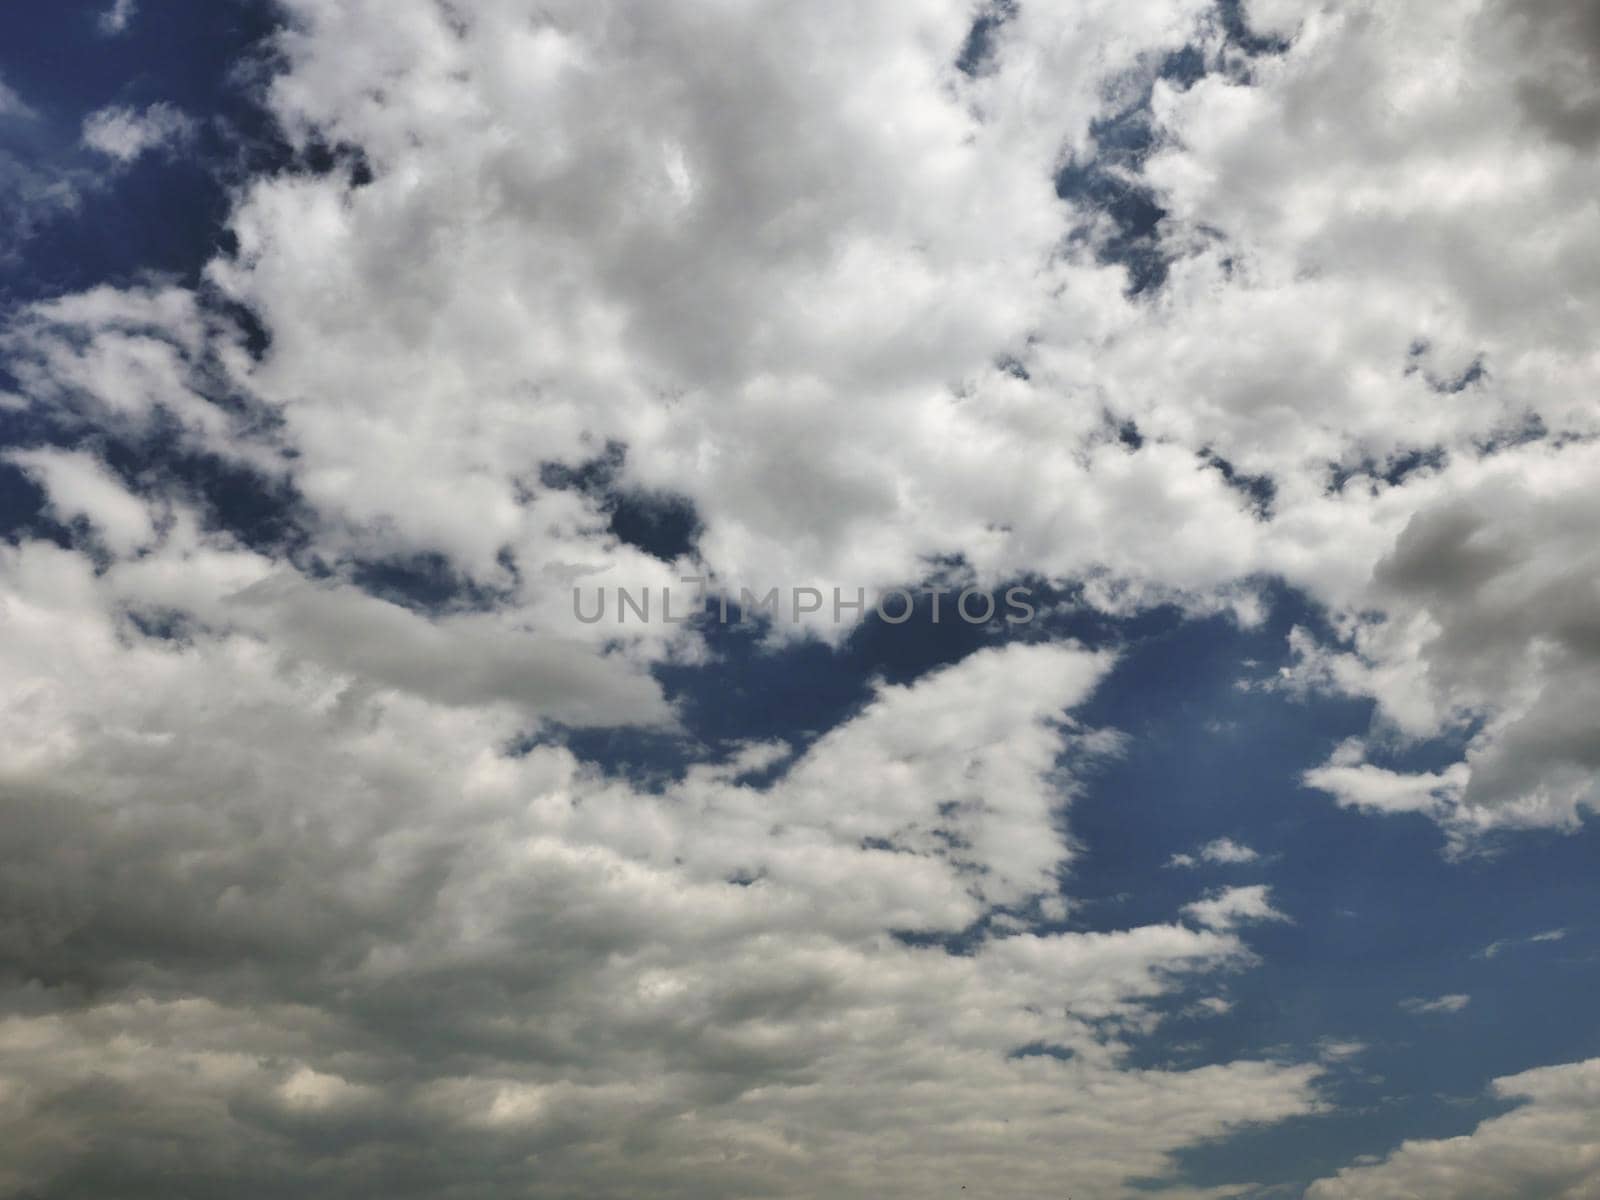 clear blue sky background,clouds with background